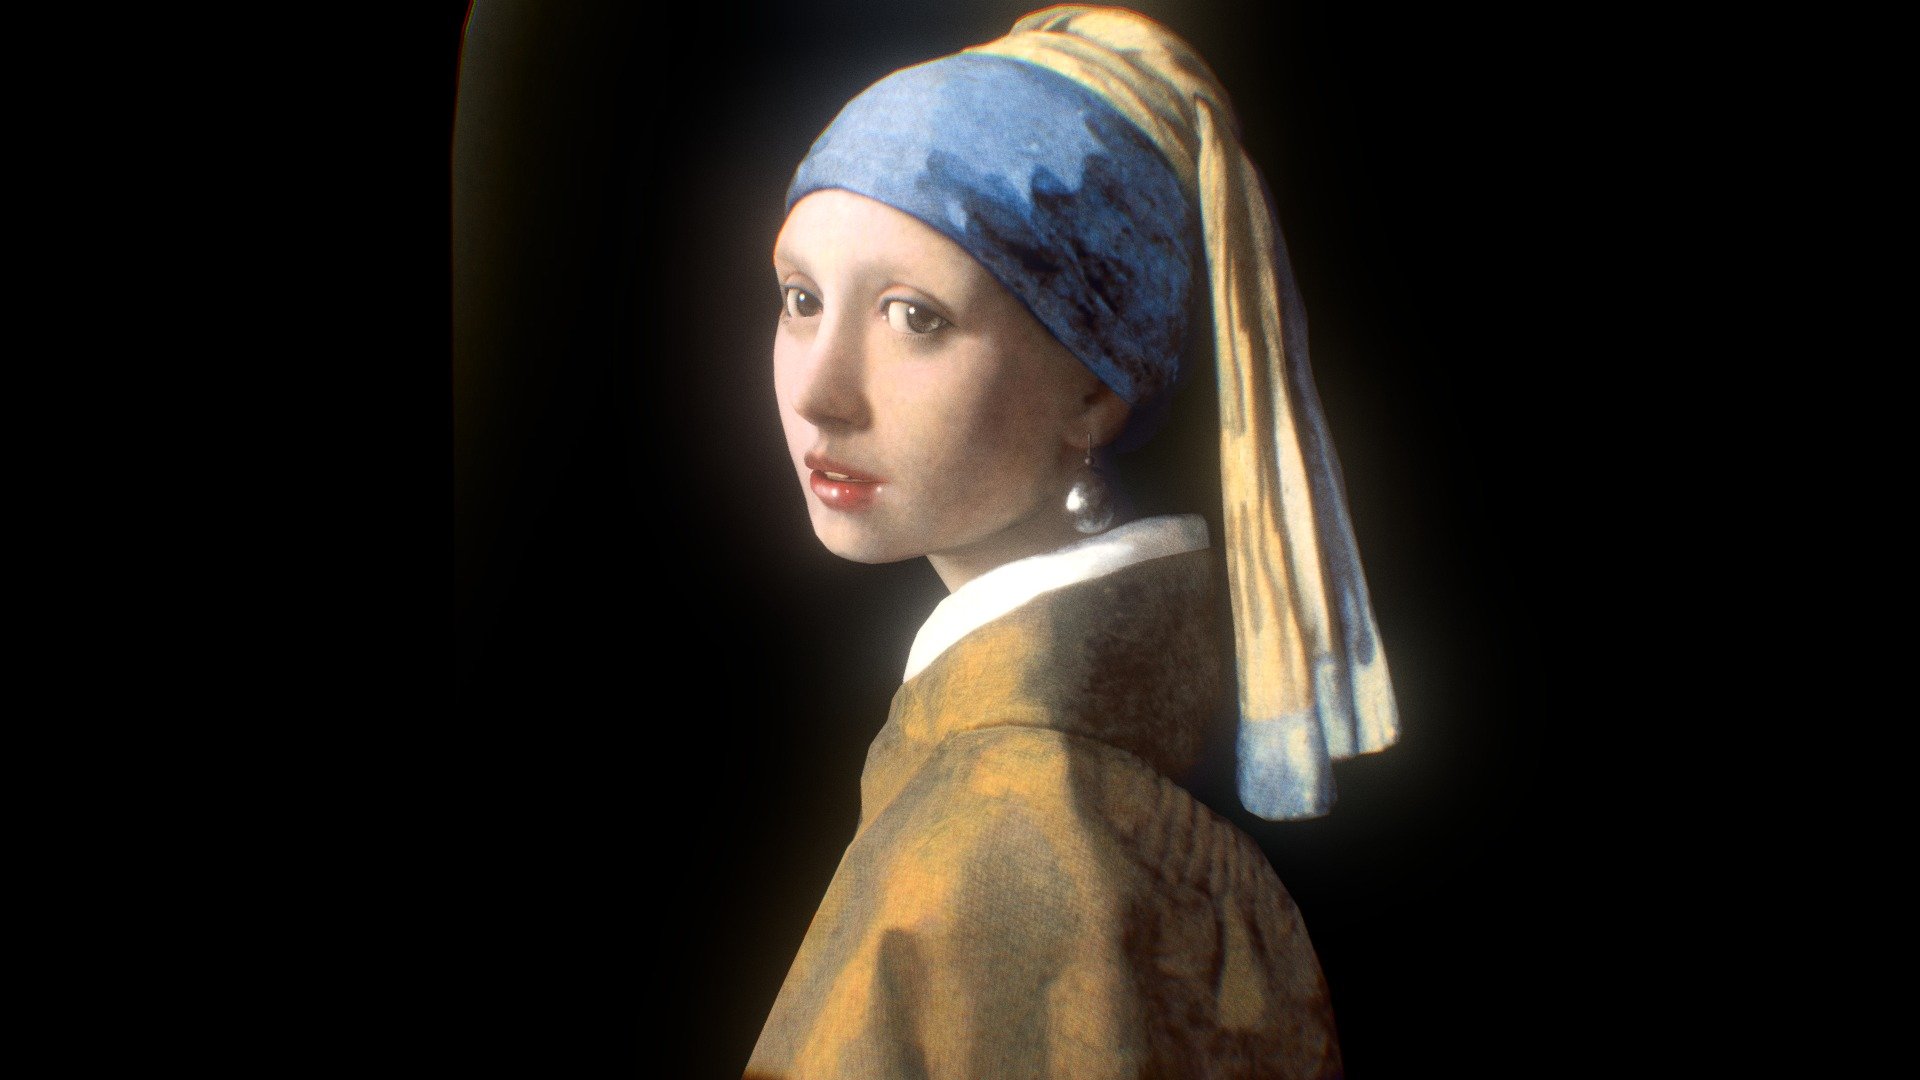 This is a tribute to the 17th-century Dutch Golden Age / Baroque painter Johannes Vermeer (1632-1675) and his captivating painting, Girl with a Pearl Earring (1665).

The painting is a tronie of a girl wearing an exotic dress, an oriental turban, and an improbably large pearl earring. It has been in the collection of the Mauritshuis in The Hague since 1902.

Being faithful to the original painting while pushing depth beyond the 2D realm, I am interested to bring her to life, as if she is reading the audience's reaction, wanting to comment but too shy to speak.

(Source information and image linked from Wikipedia and the Mauritshuis)

 - Girl with a Pearl Earring 3D - 3D model by hinxlinx 3d model